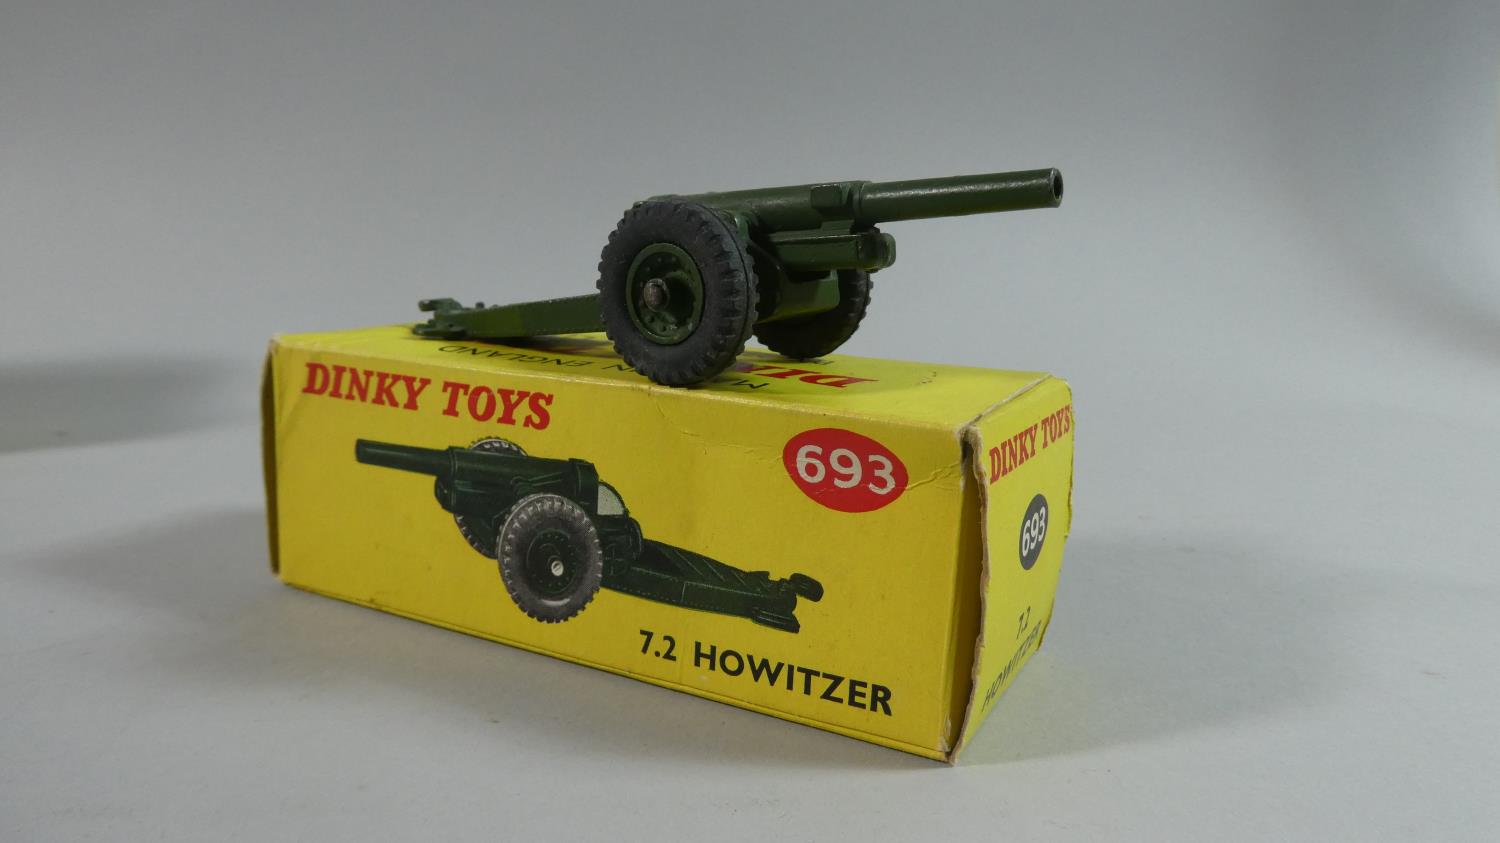 Three Boxed Military Dinky Toys. 25-Pounder Field Gun Set No 697, 7.2 Howitzer No 693 and - Image 2 of 5